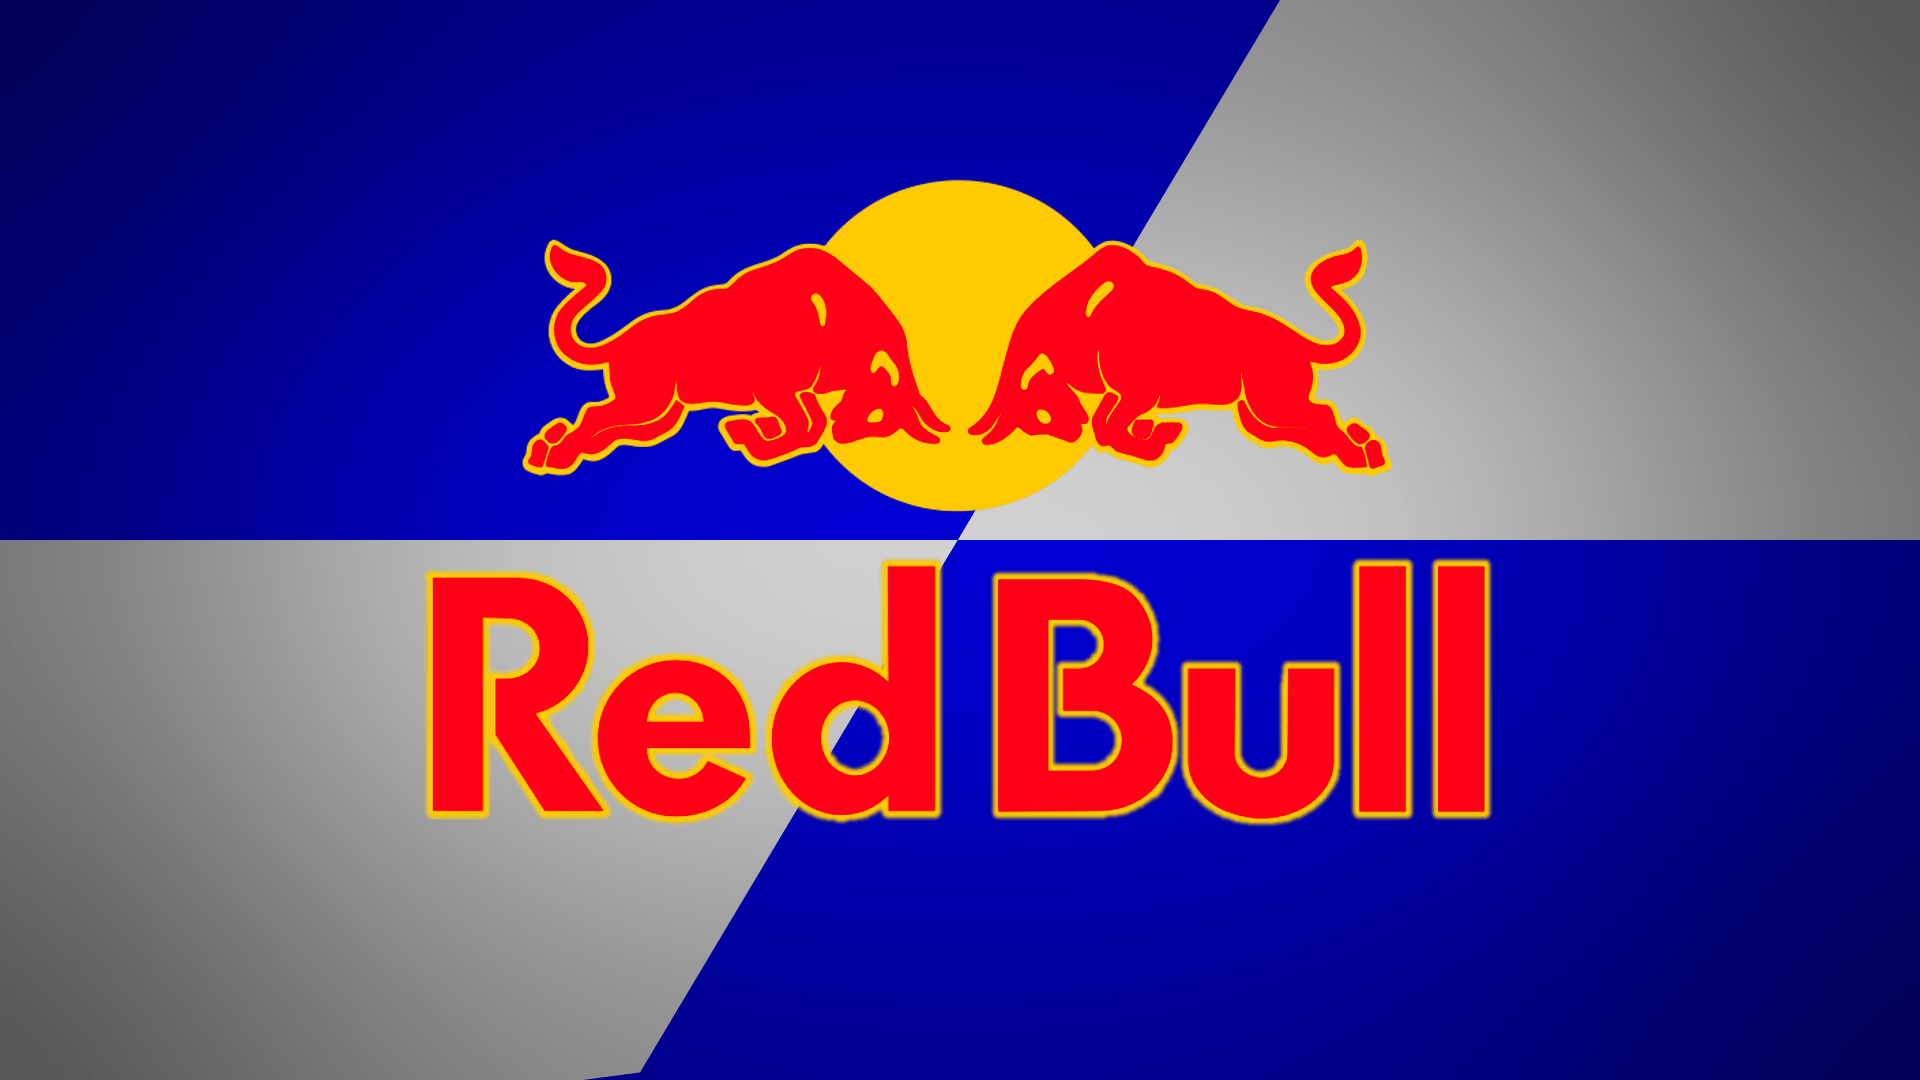 Fonds d&Red Bull : tous les wallpapers Red Bull